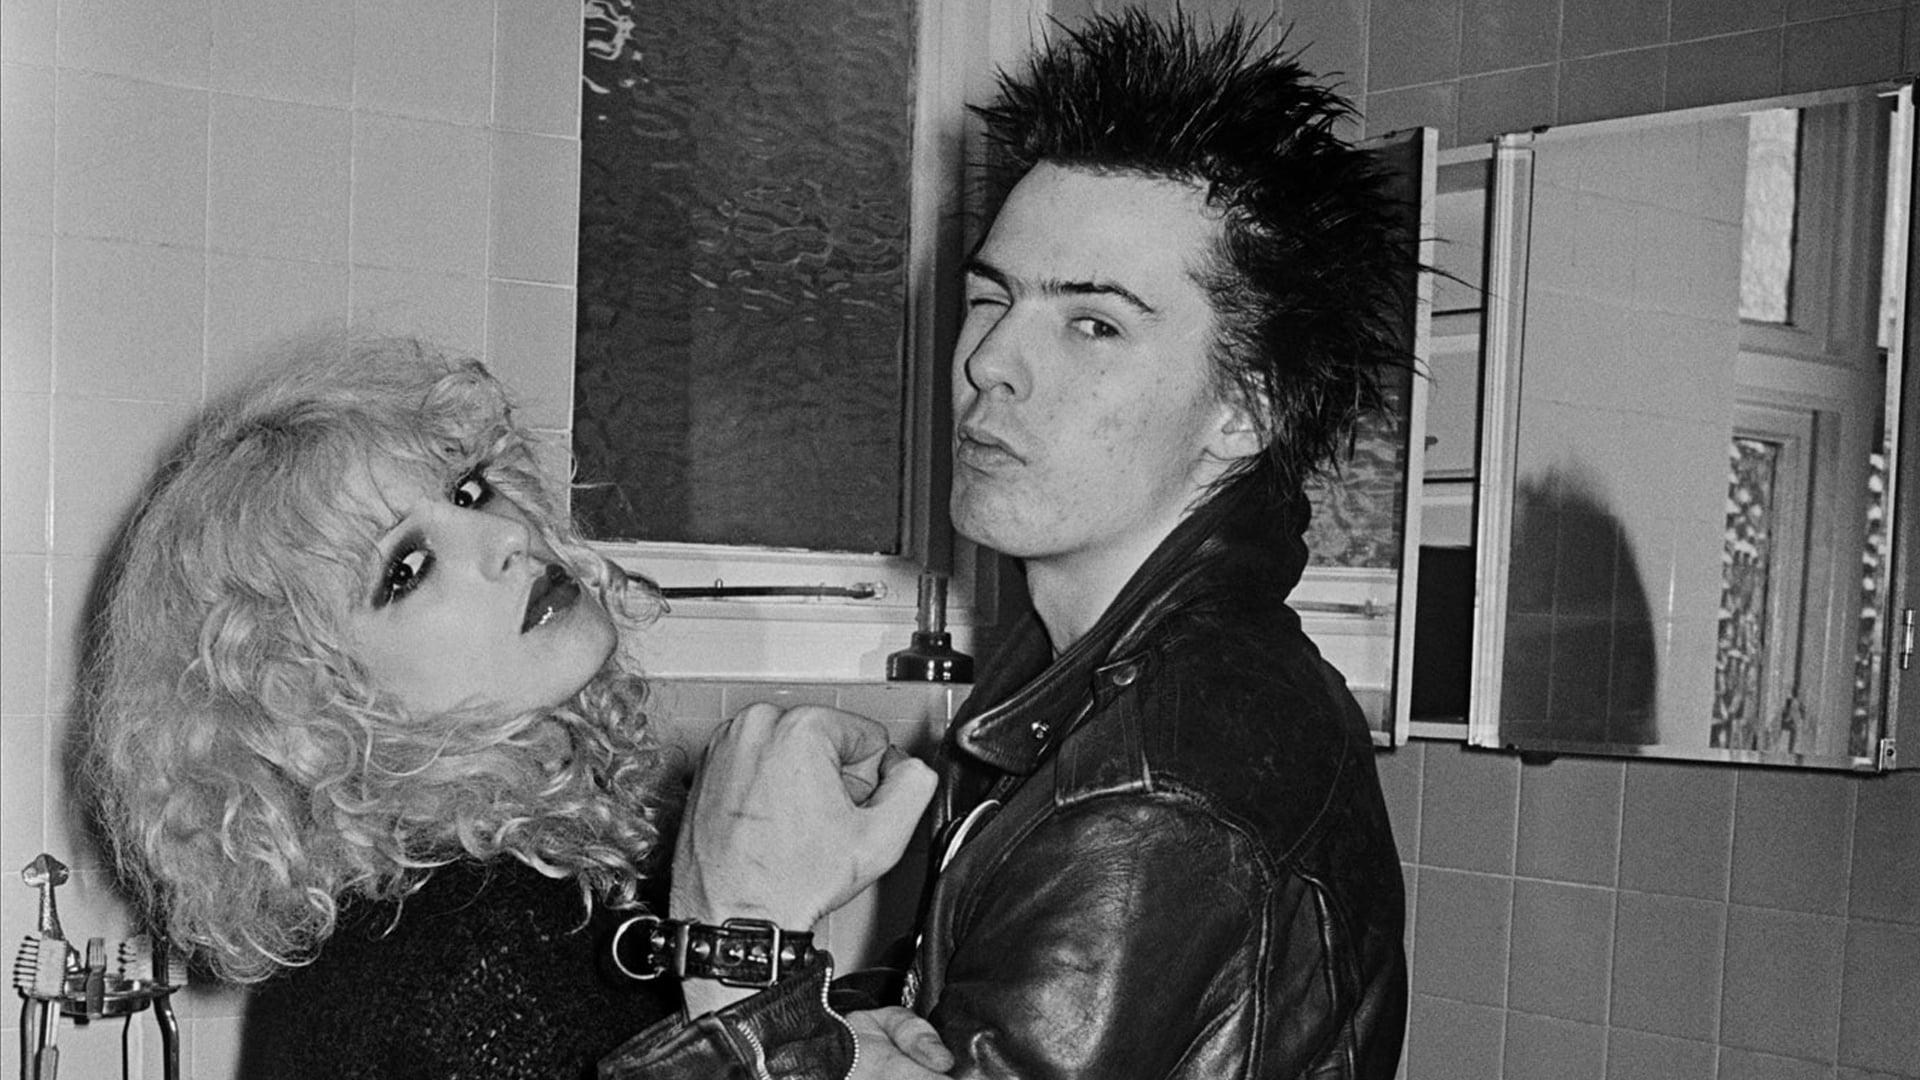 Sad Vacation: The Last Days of Sid and Nancy backdrop